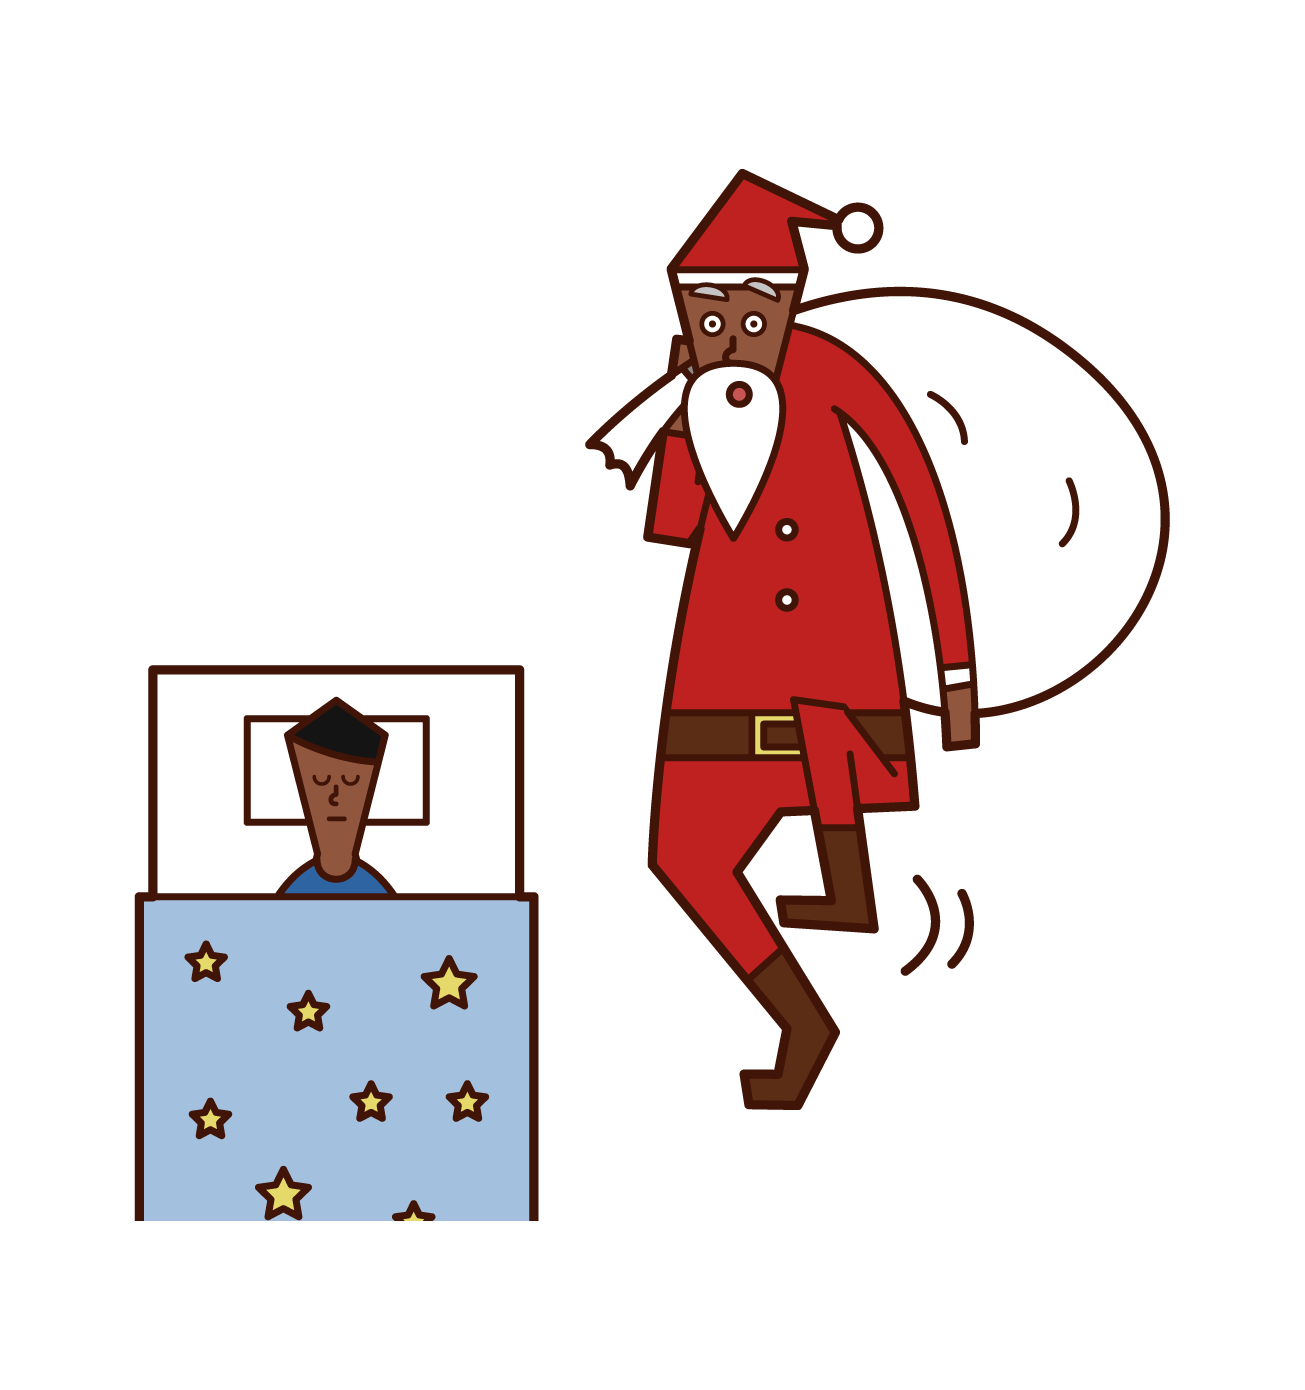 Illustration of Santa Claus giving a present to a sleeping child